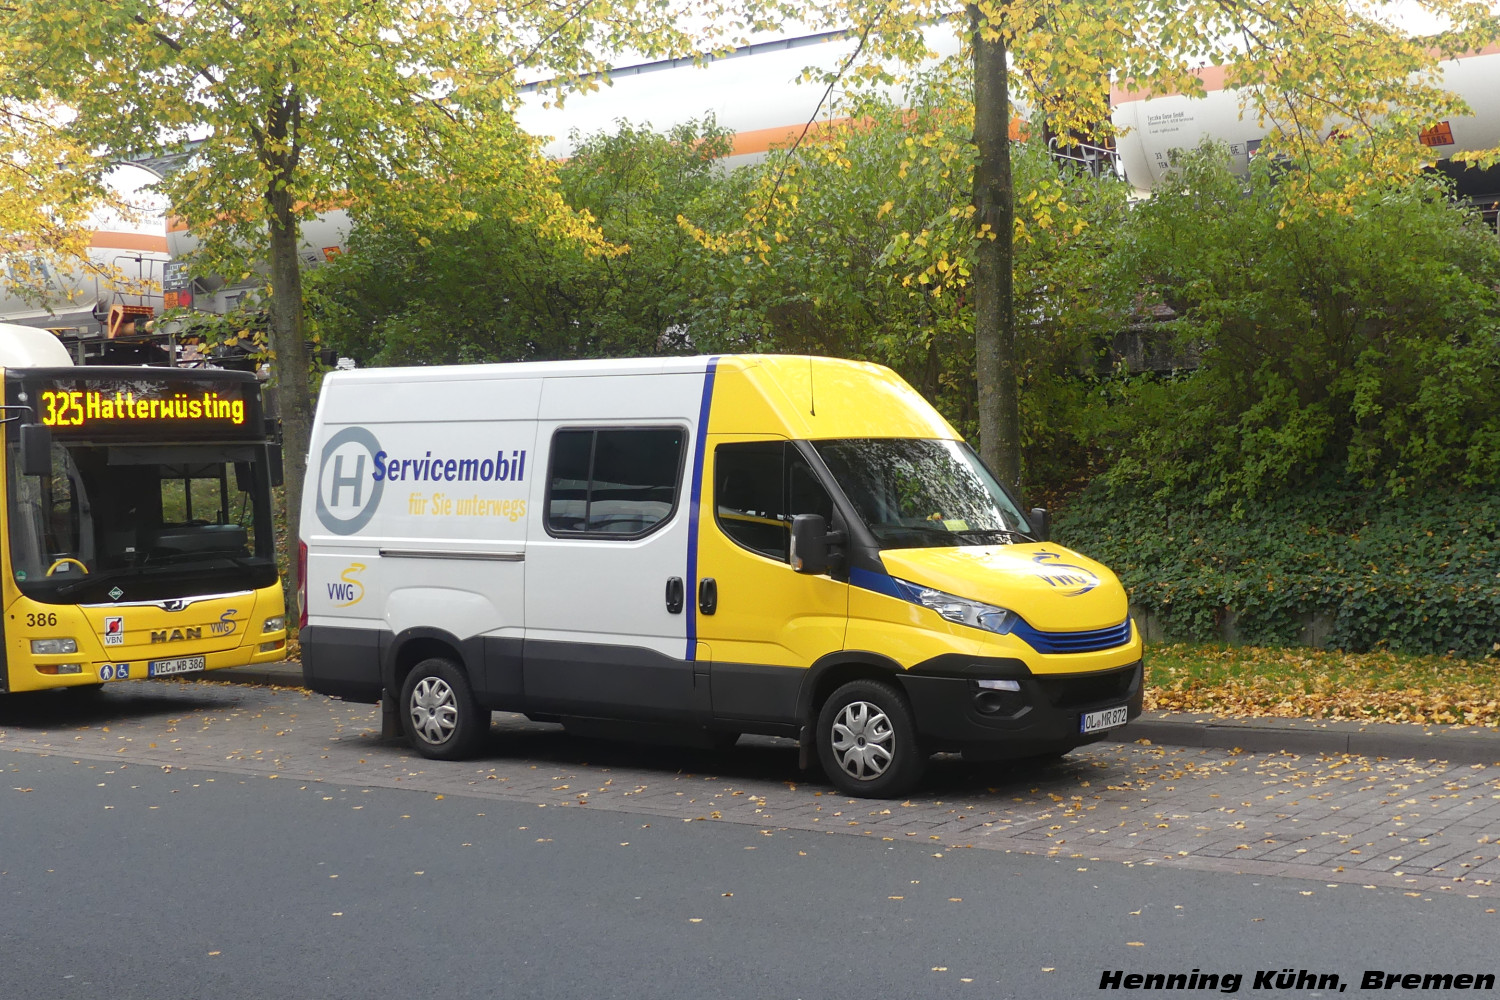 Iveco Daily (6) #OL-MR 872